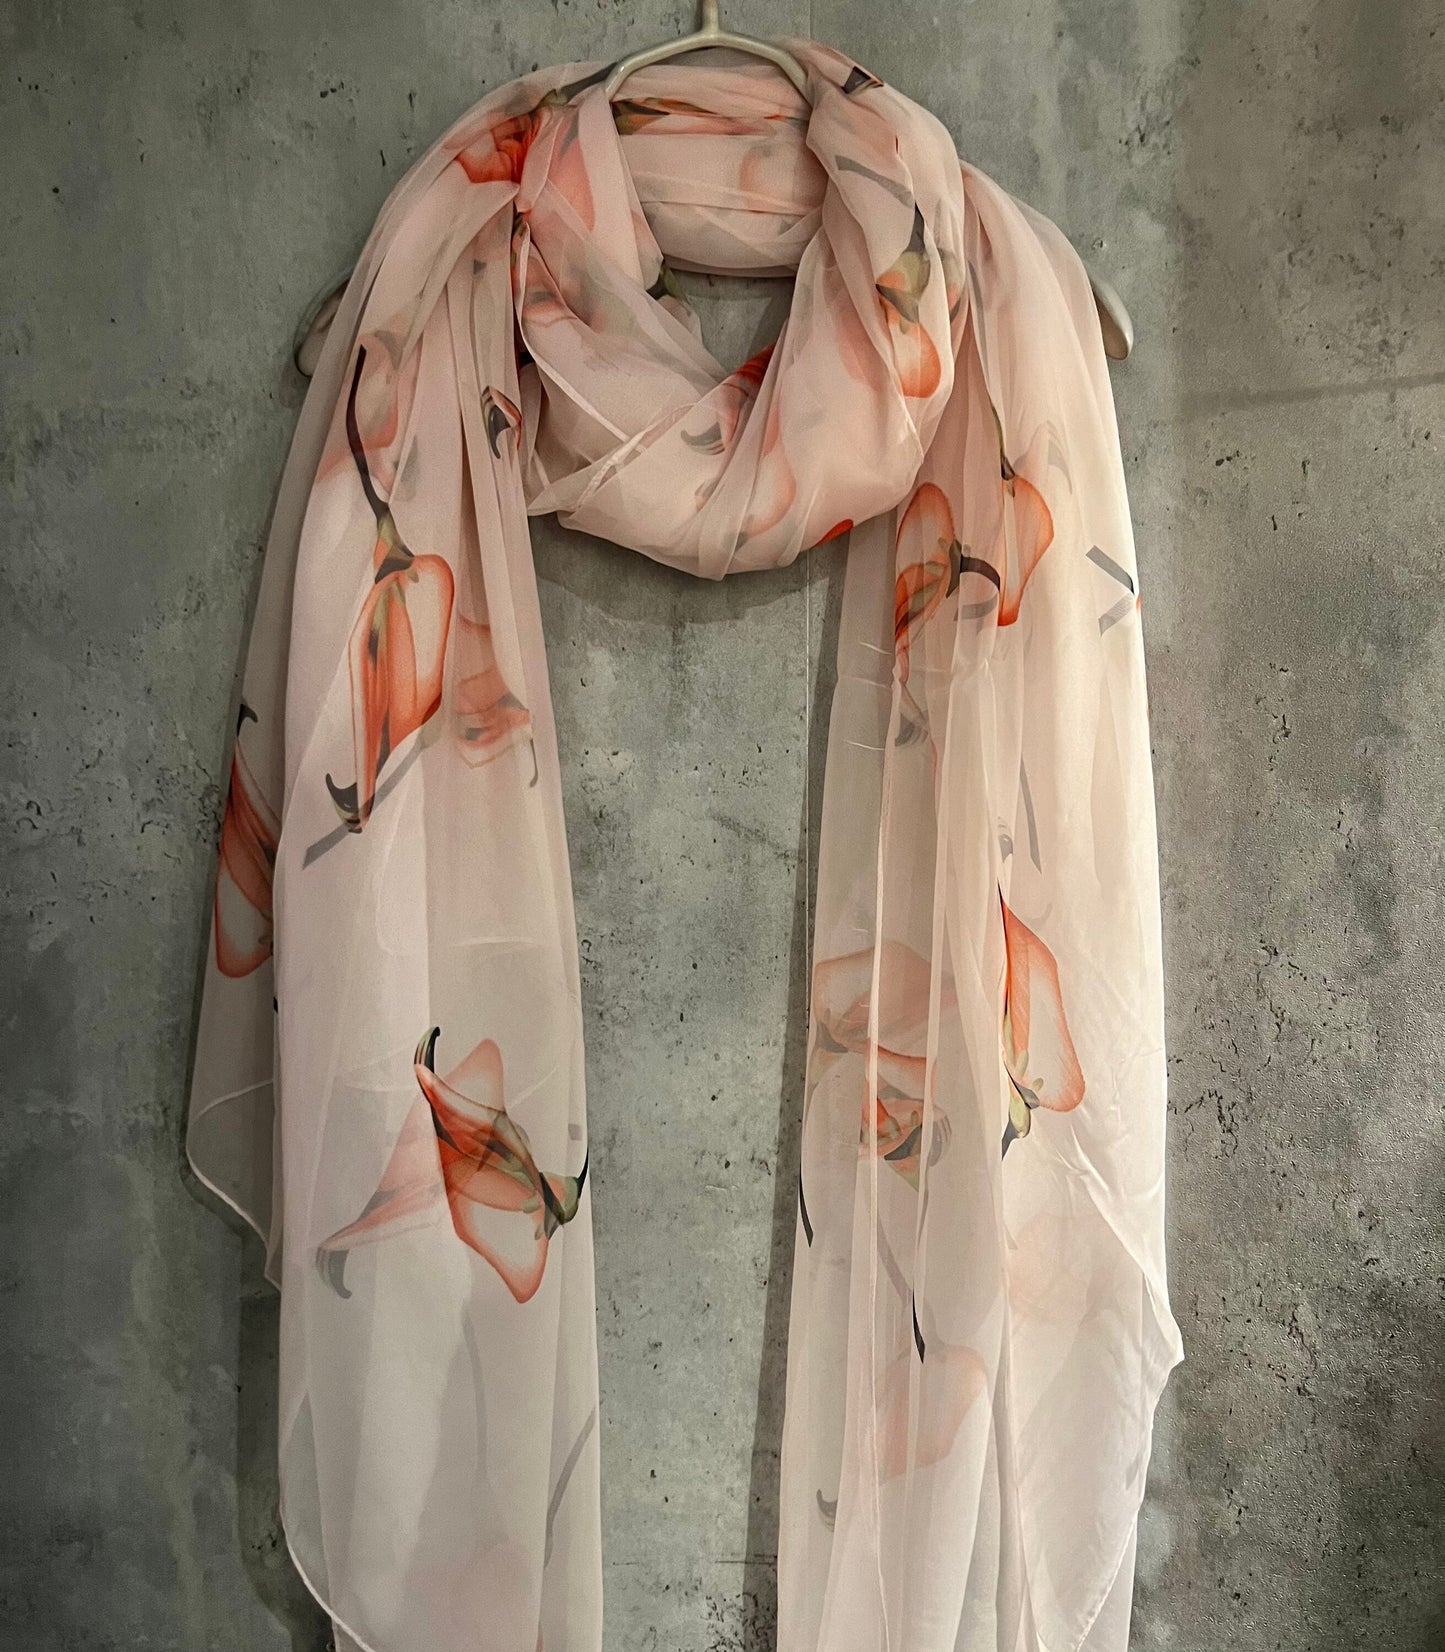 Calla Lily Flowers Pink Silk Scarf/Spring Summer Autumn Scarf/Gifts For Her Birthday Christmas/Gifts For Mum/Wedding Scarf/Evening Scarf